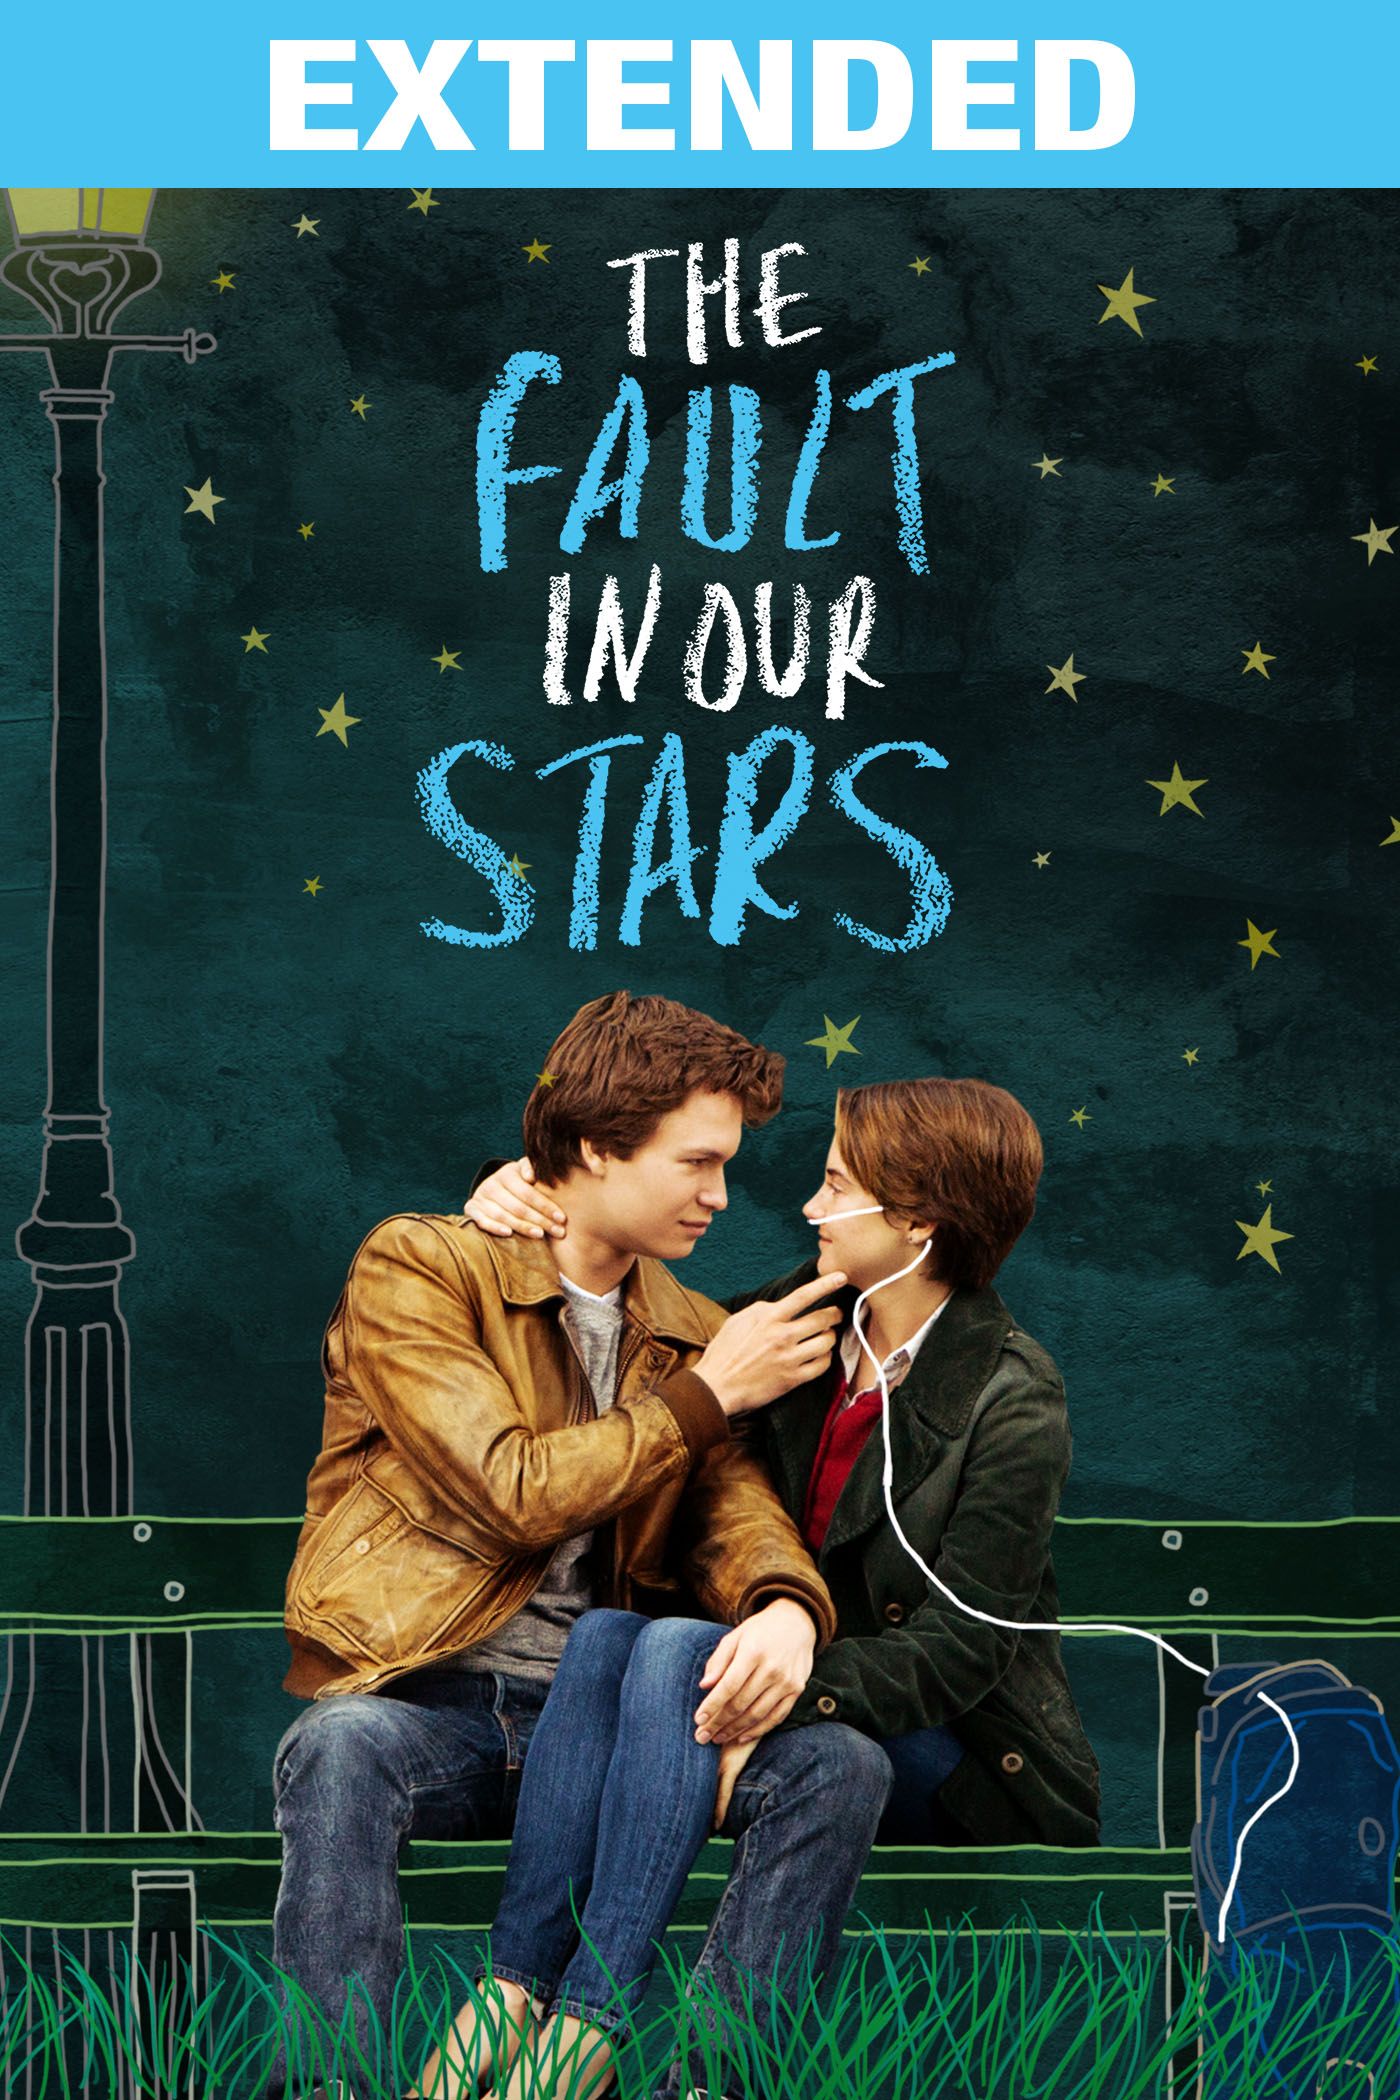 movies like the fault in our stars